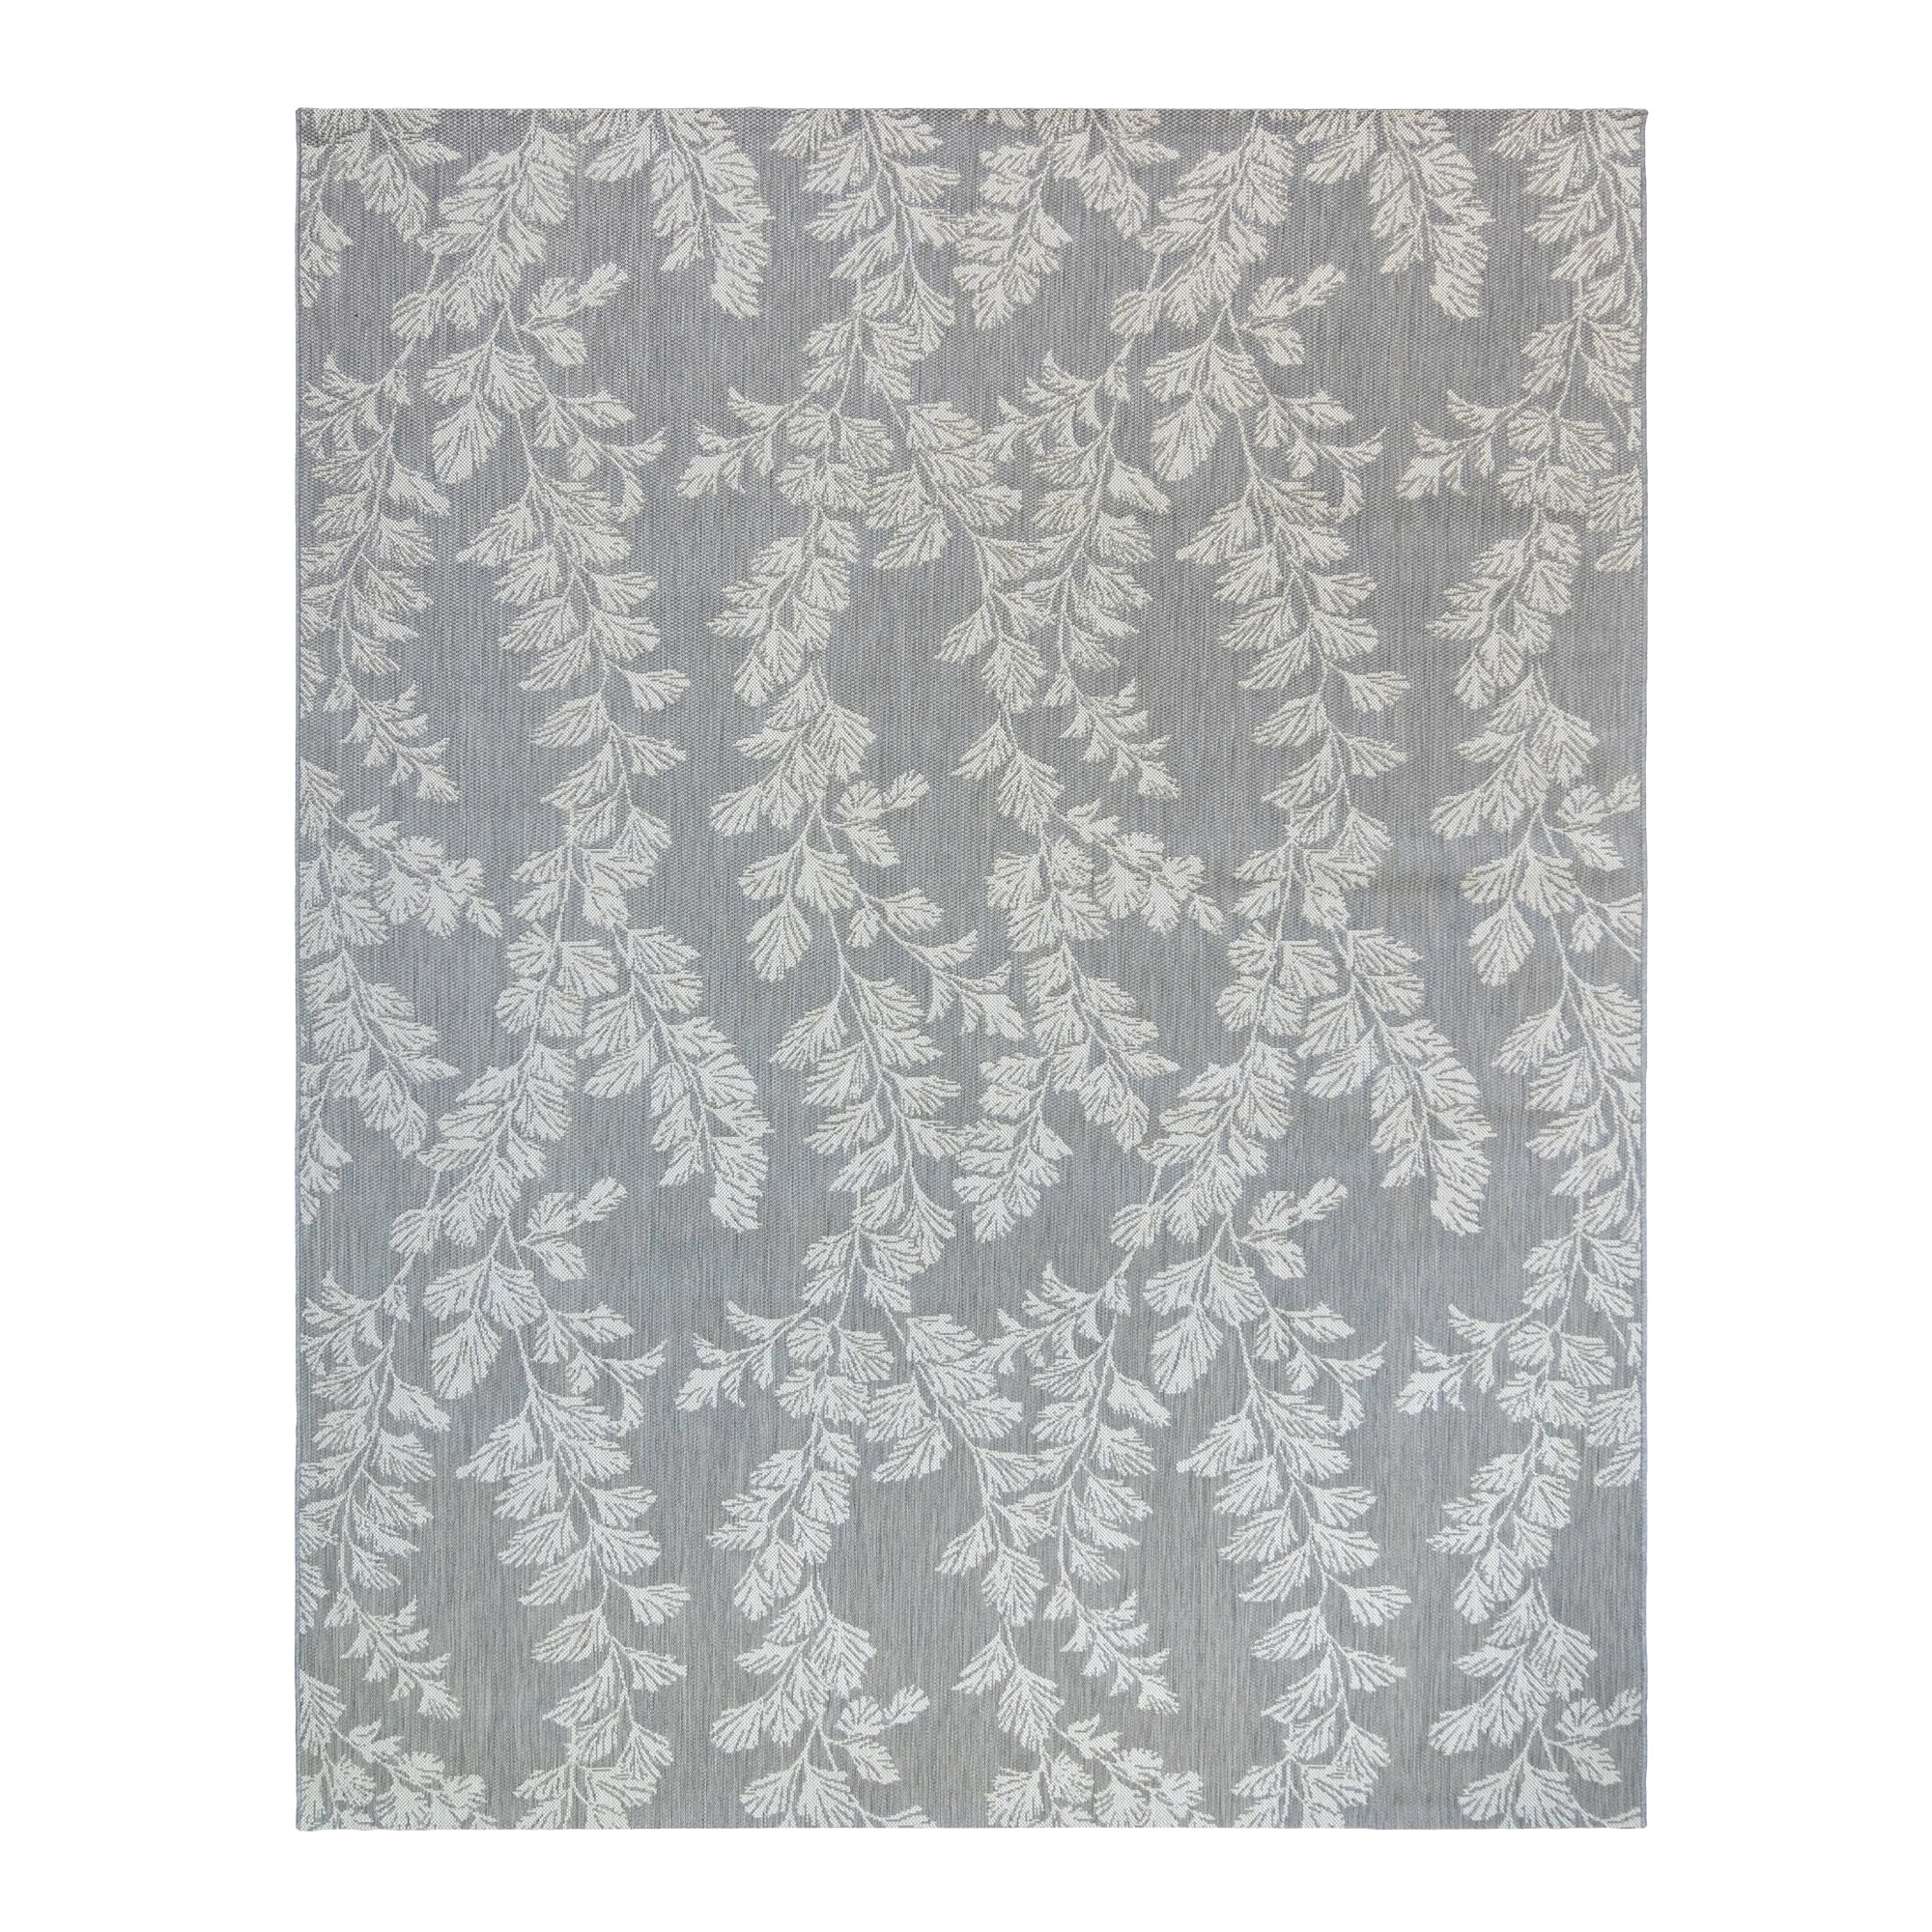 Featured image of post Laura Ashley Area Rugs 8X10 X 60 in light grey white